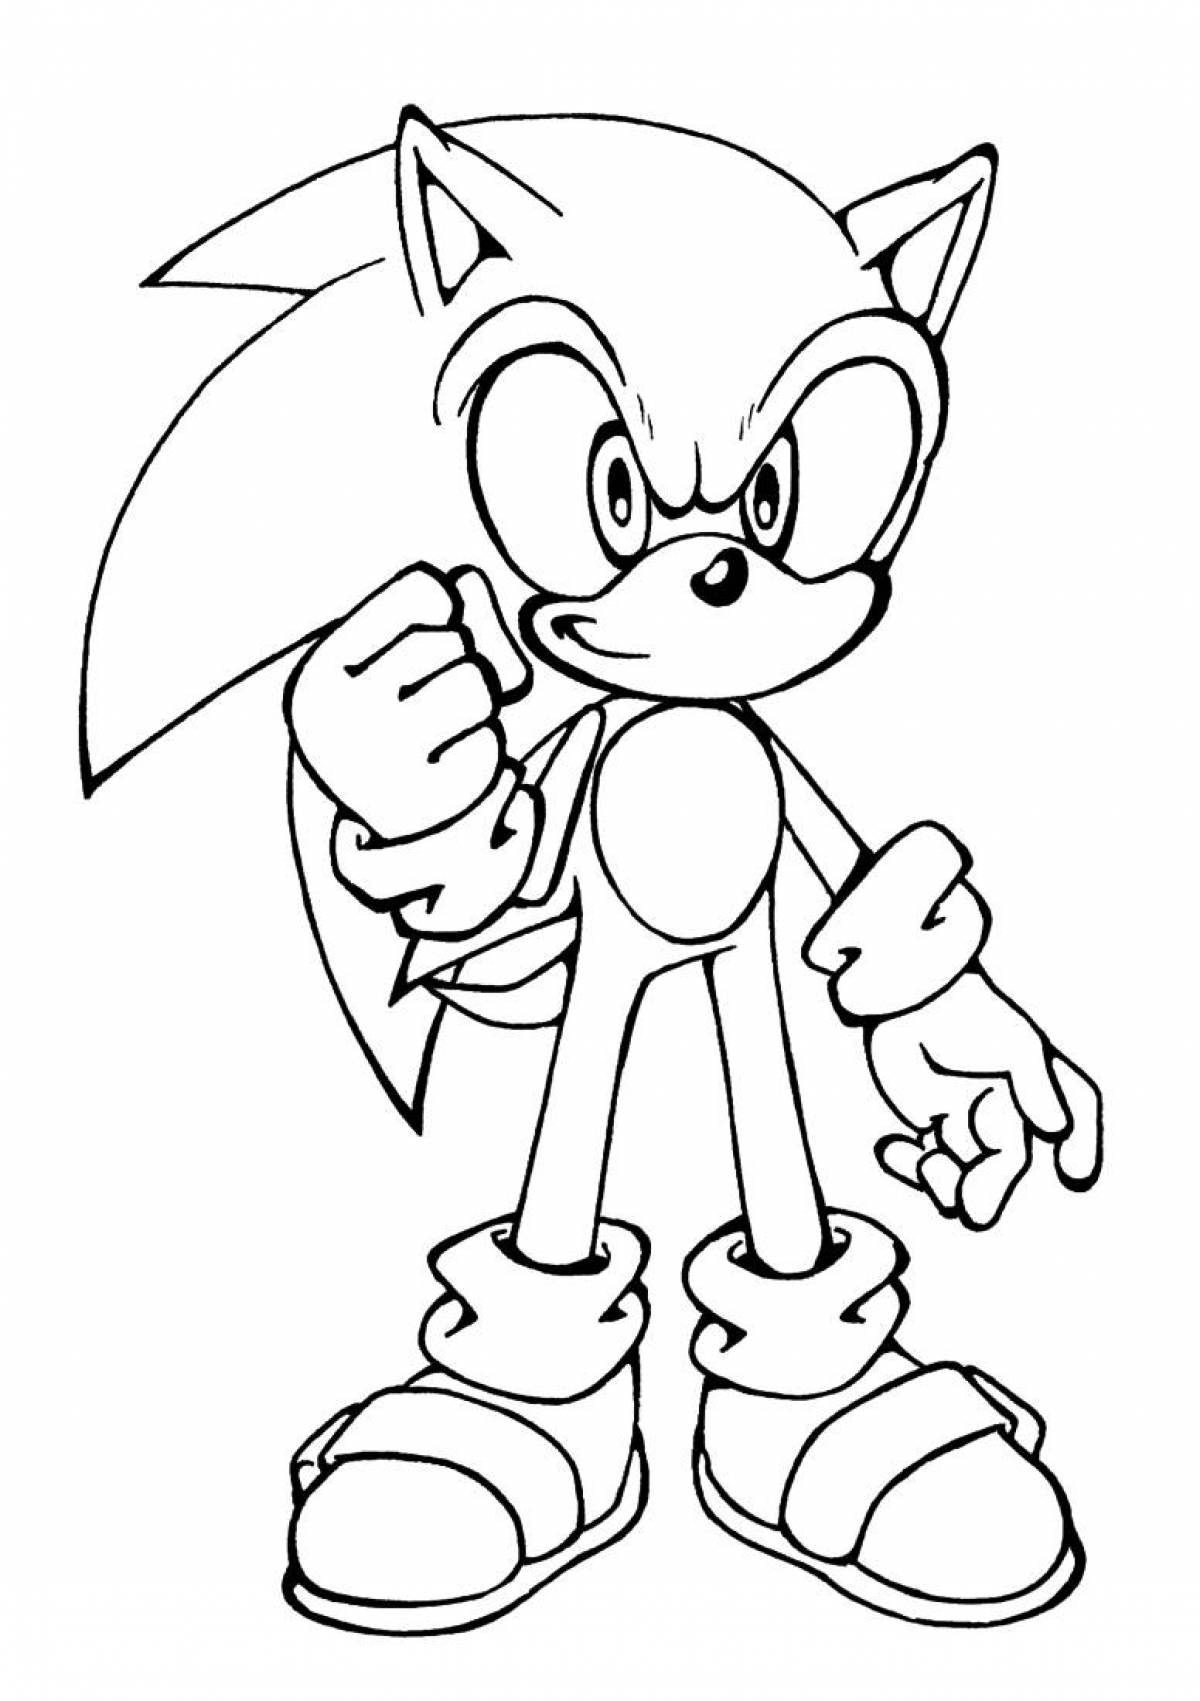 A wonderful sonic coloring book for kids